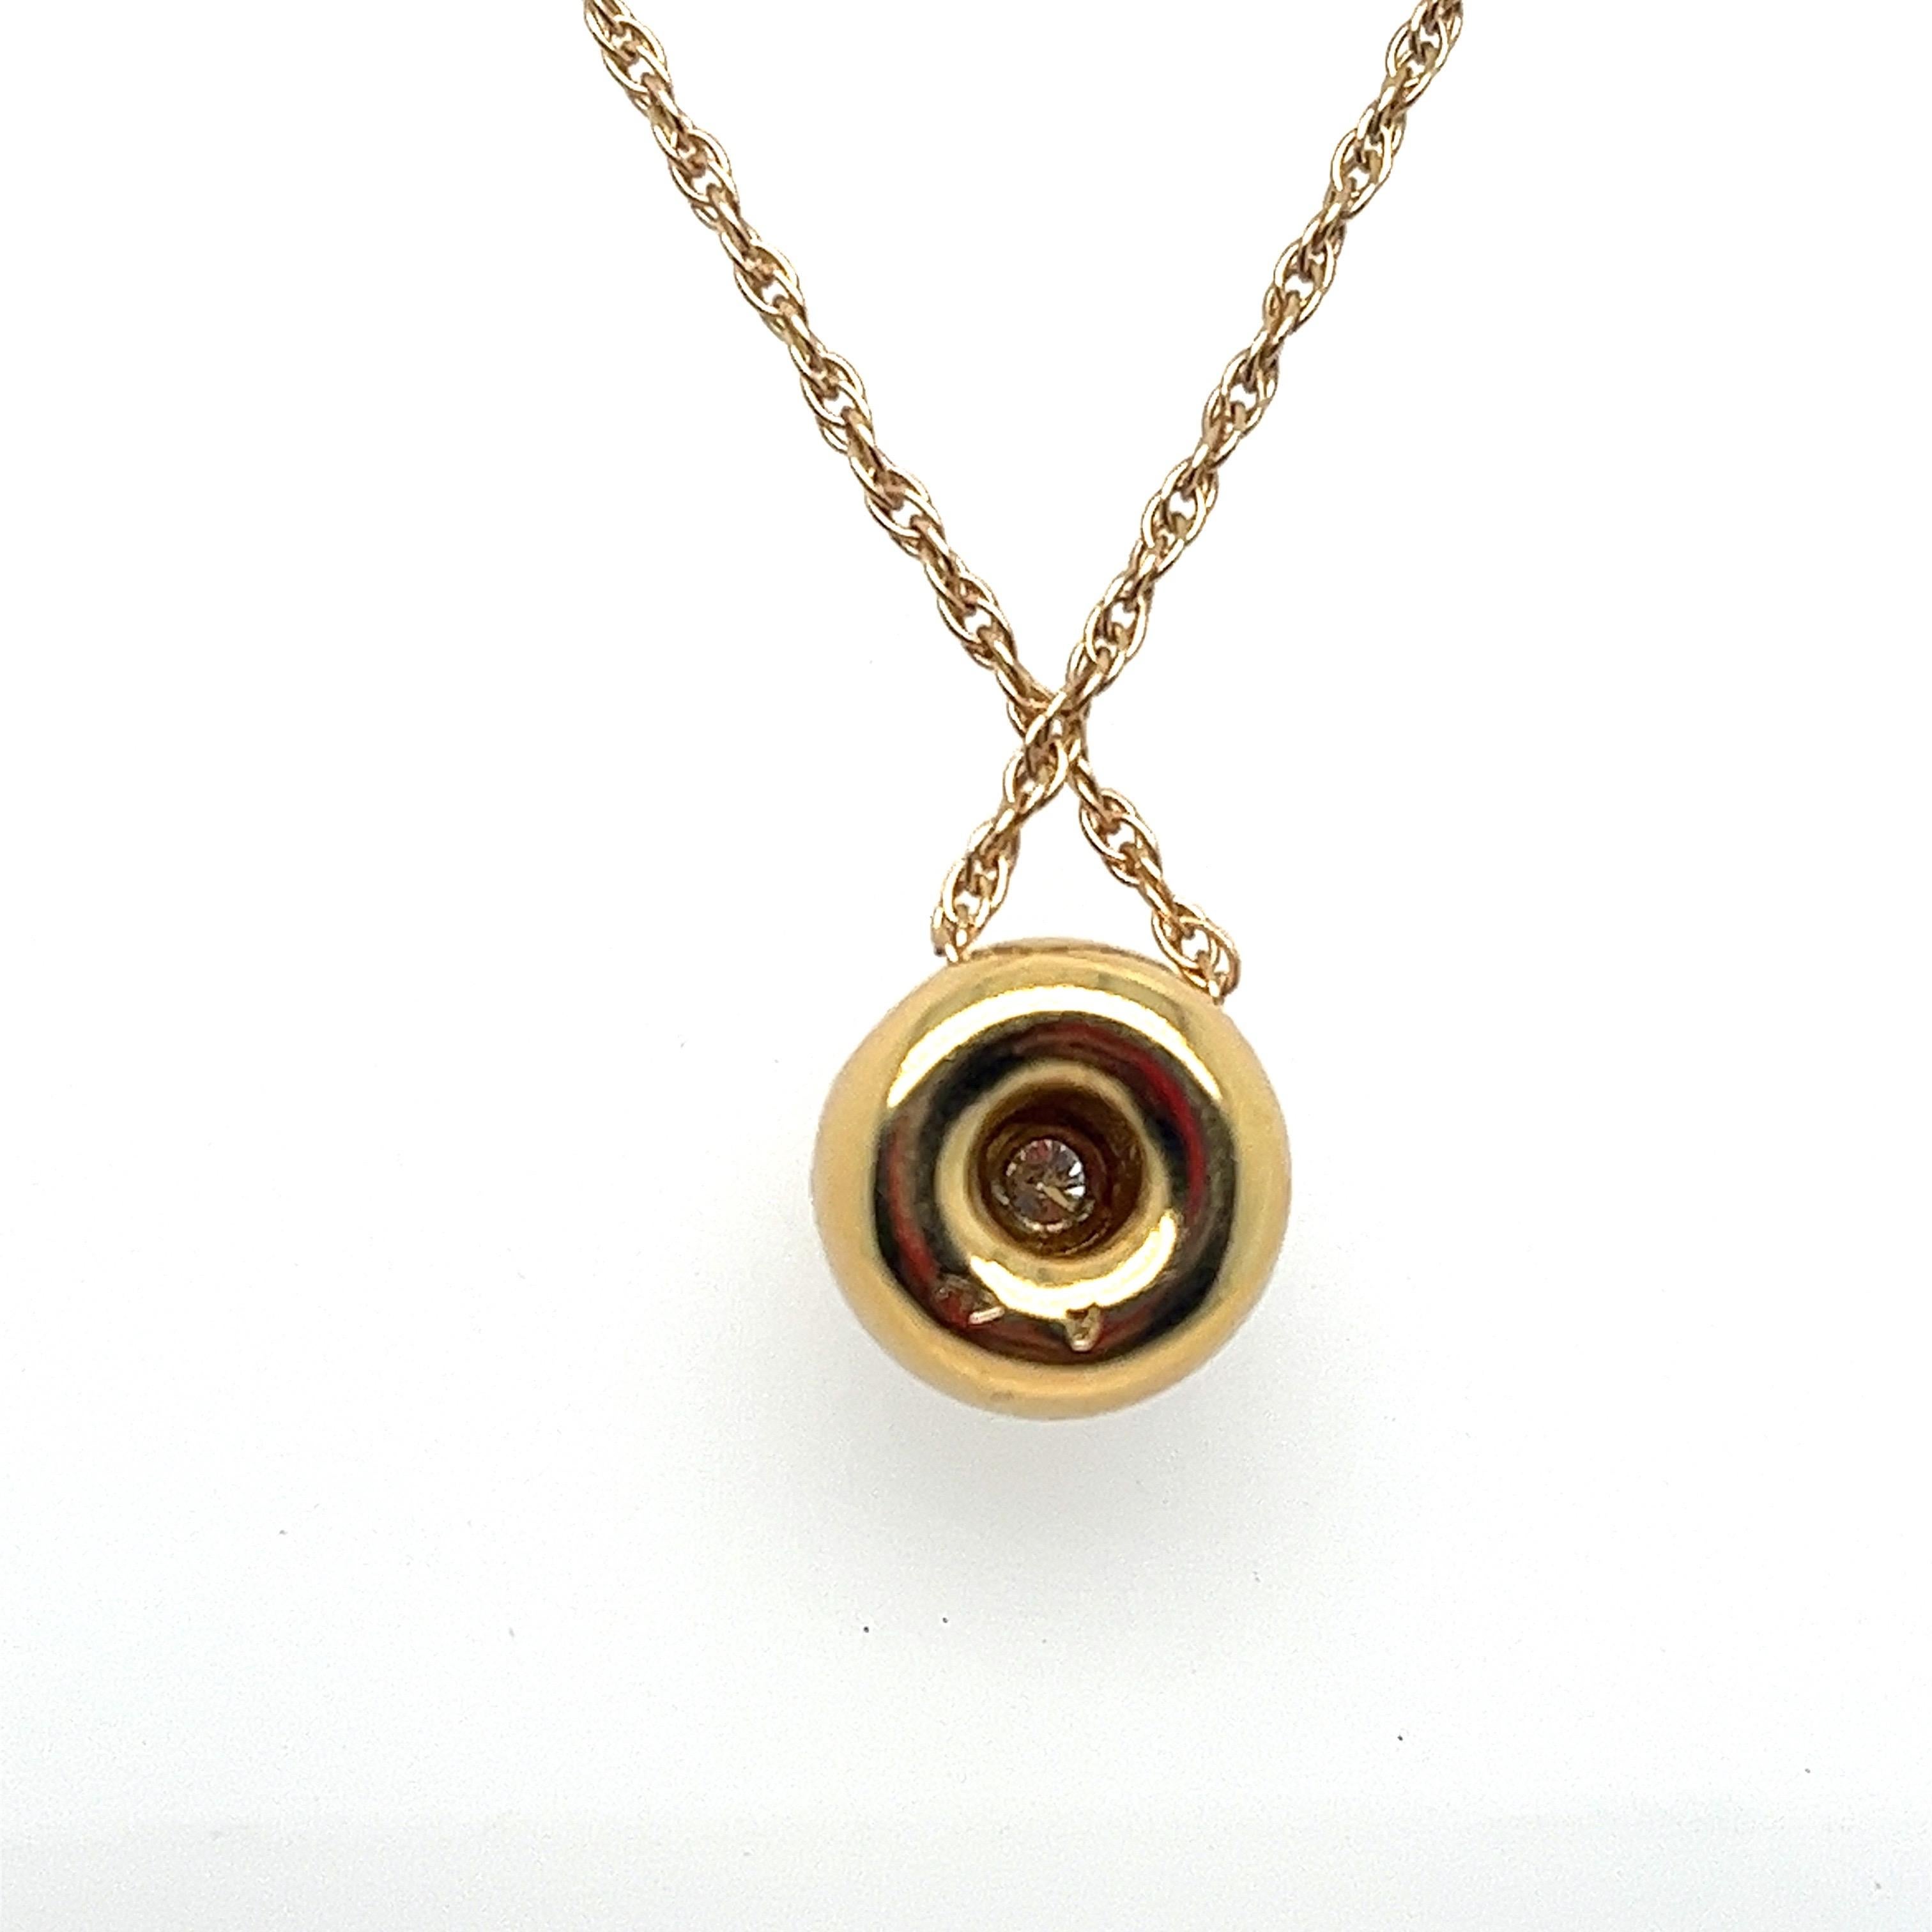 Contemporary Luxurious 18kt Gold Bauble Pendant with Top-Quality Diamond, France.